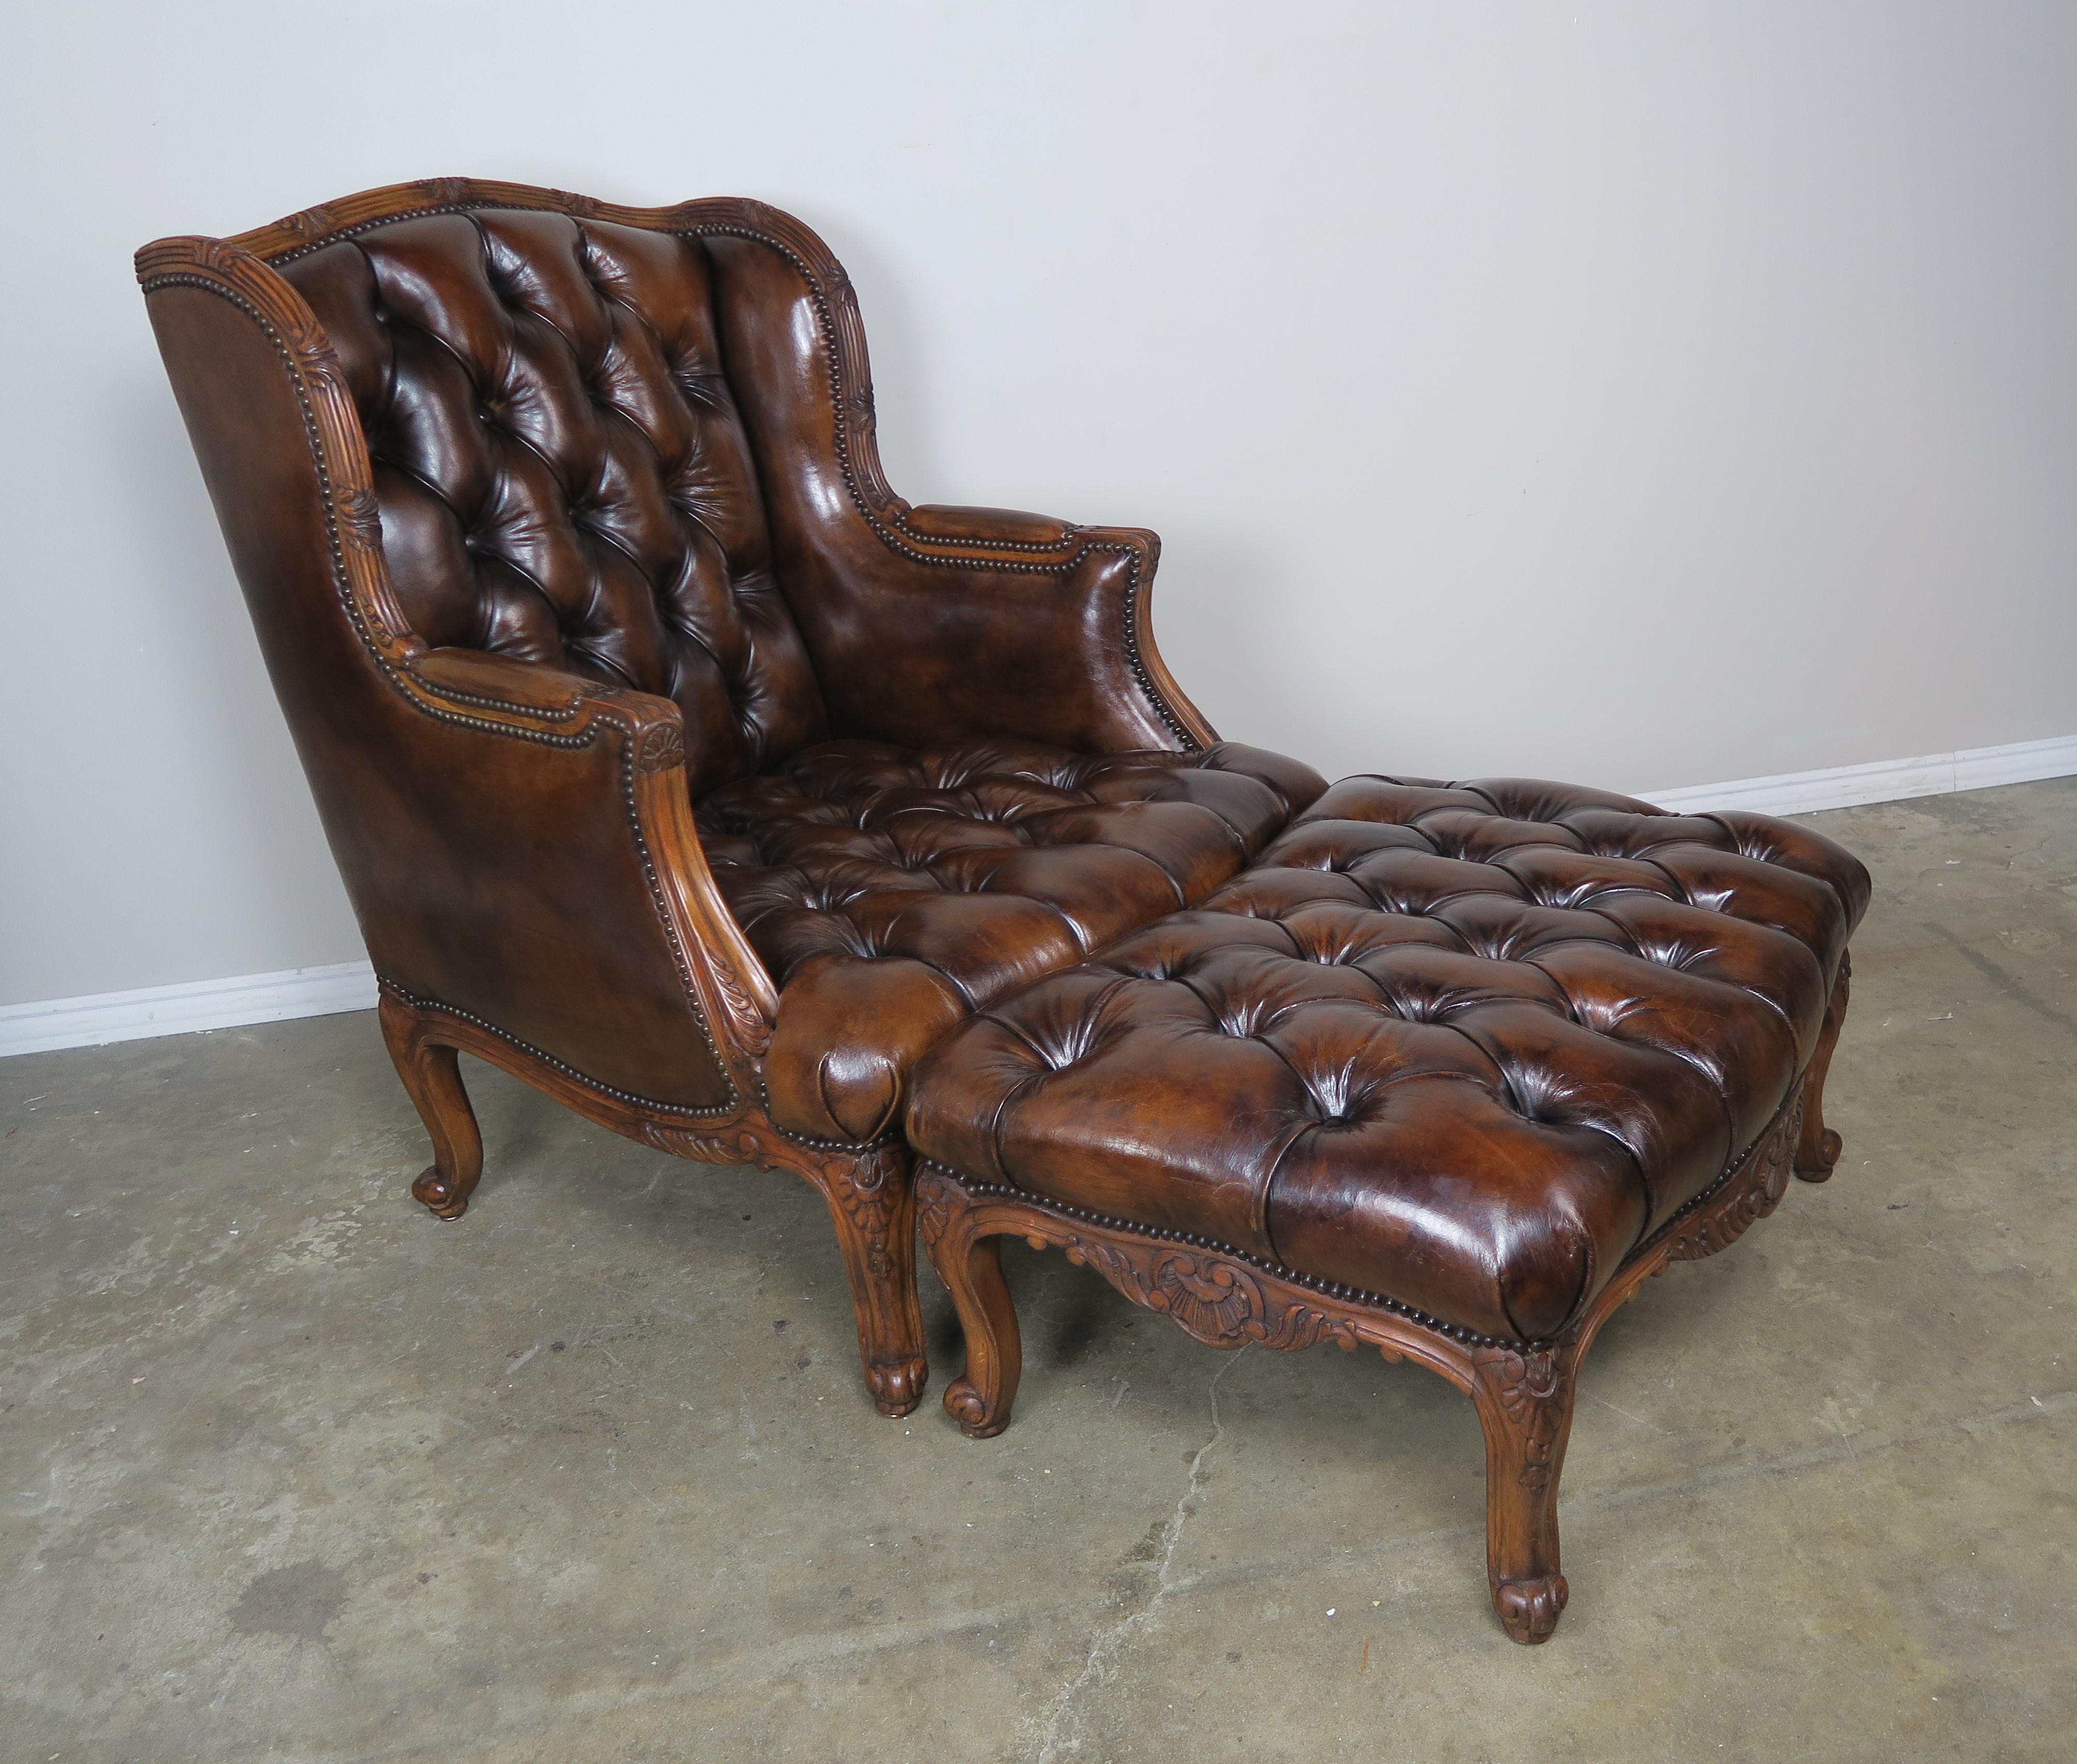 Pair of French leather wingback tufted Louis XV style chairs and ottomans that are upholstered in rich brown tufted leather with nailhead trim detail. The wingback armchairs stand on four cabriole legs as does the ottomans that end in ram's head